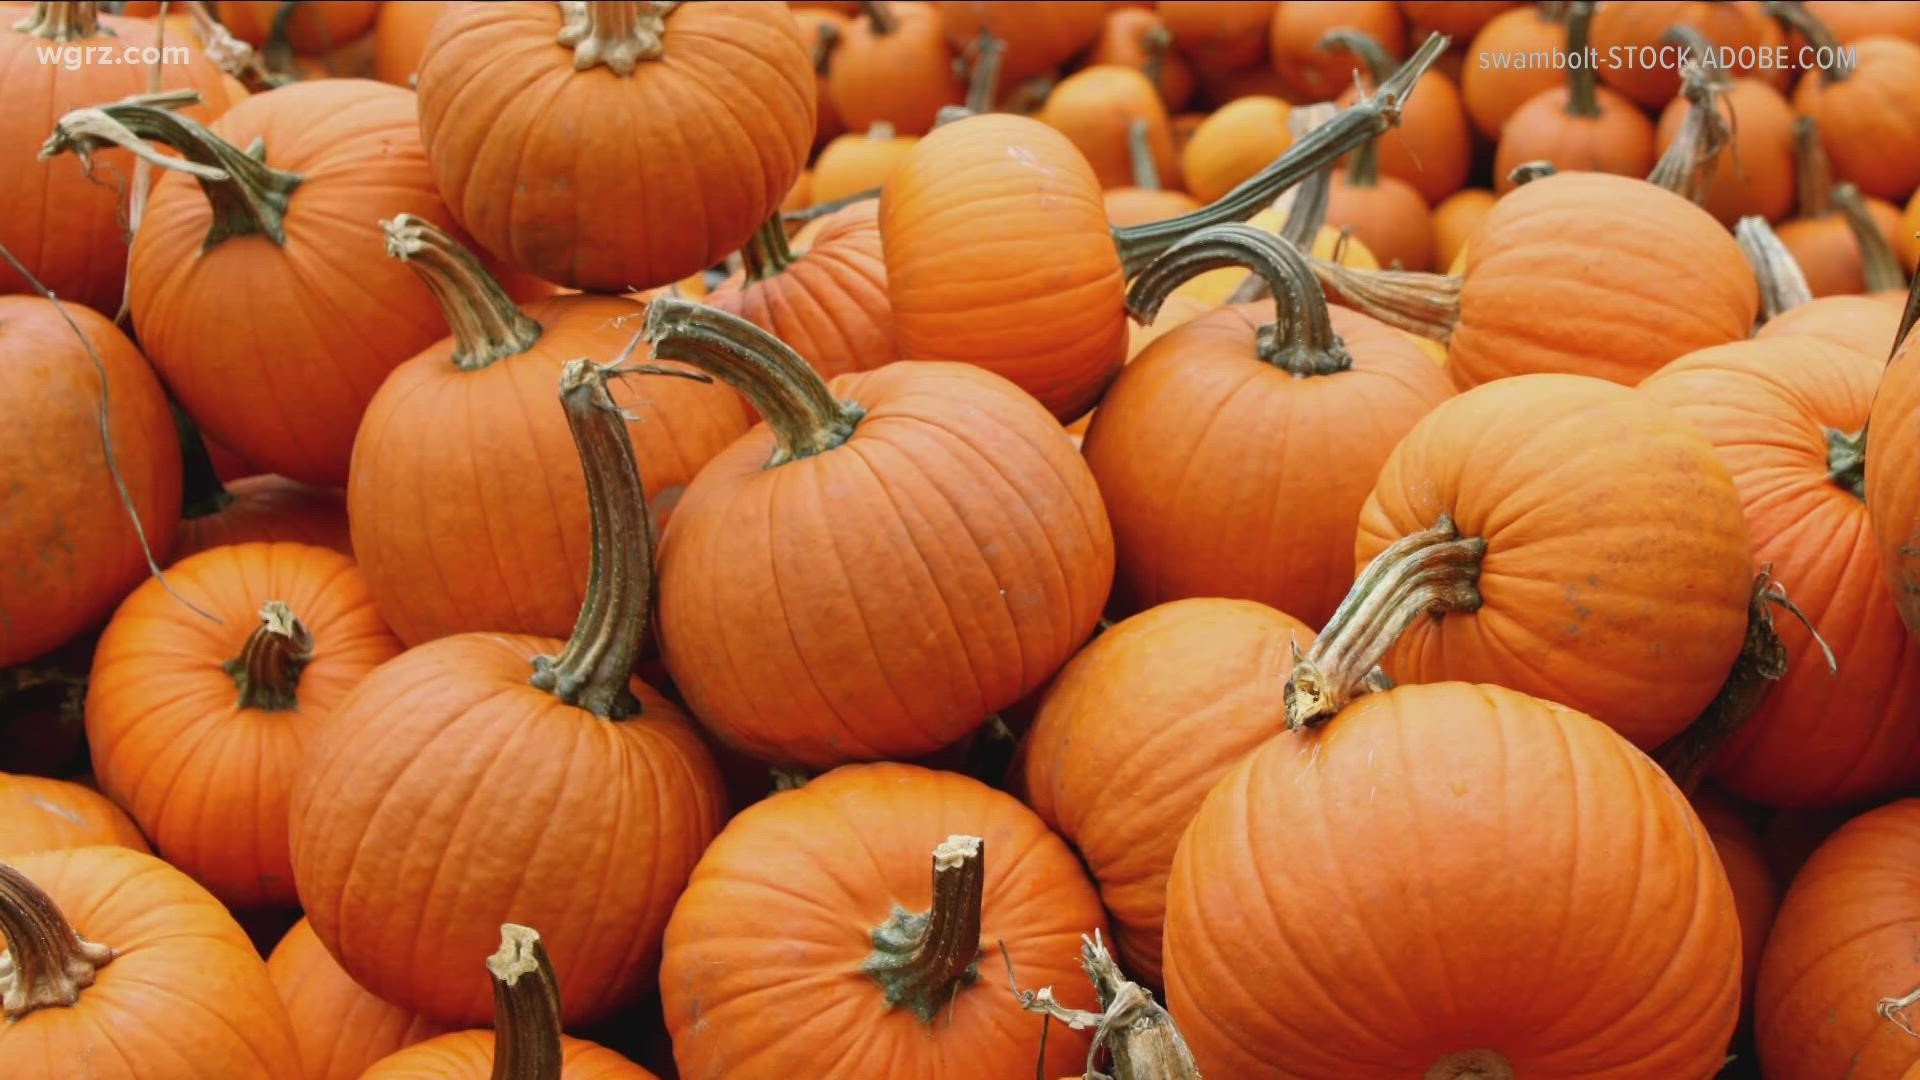 Google reveals the top pumpkin related searches